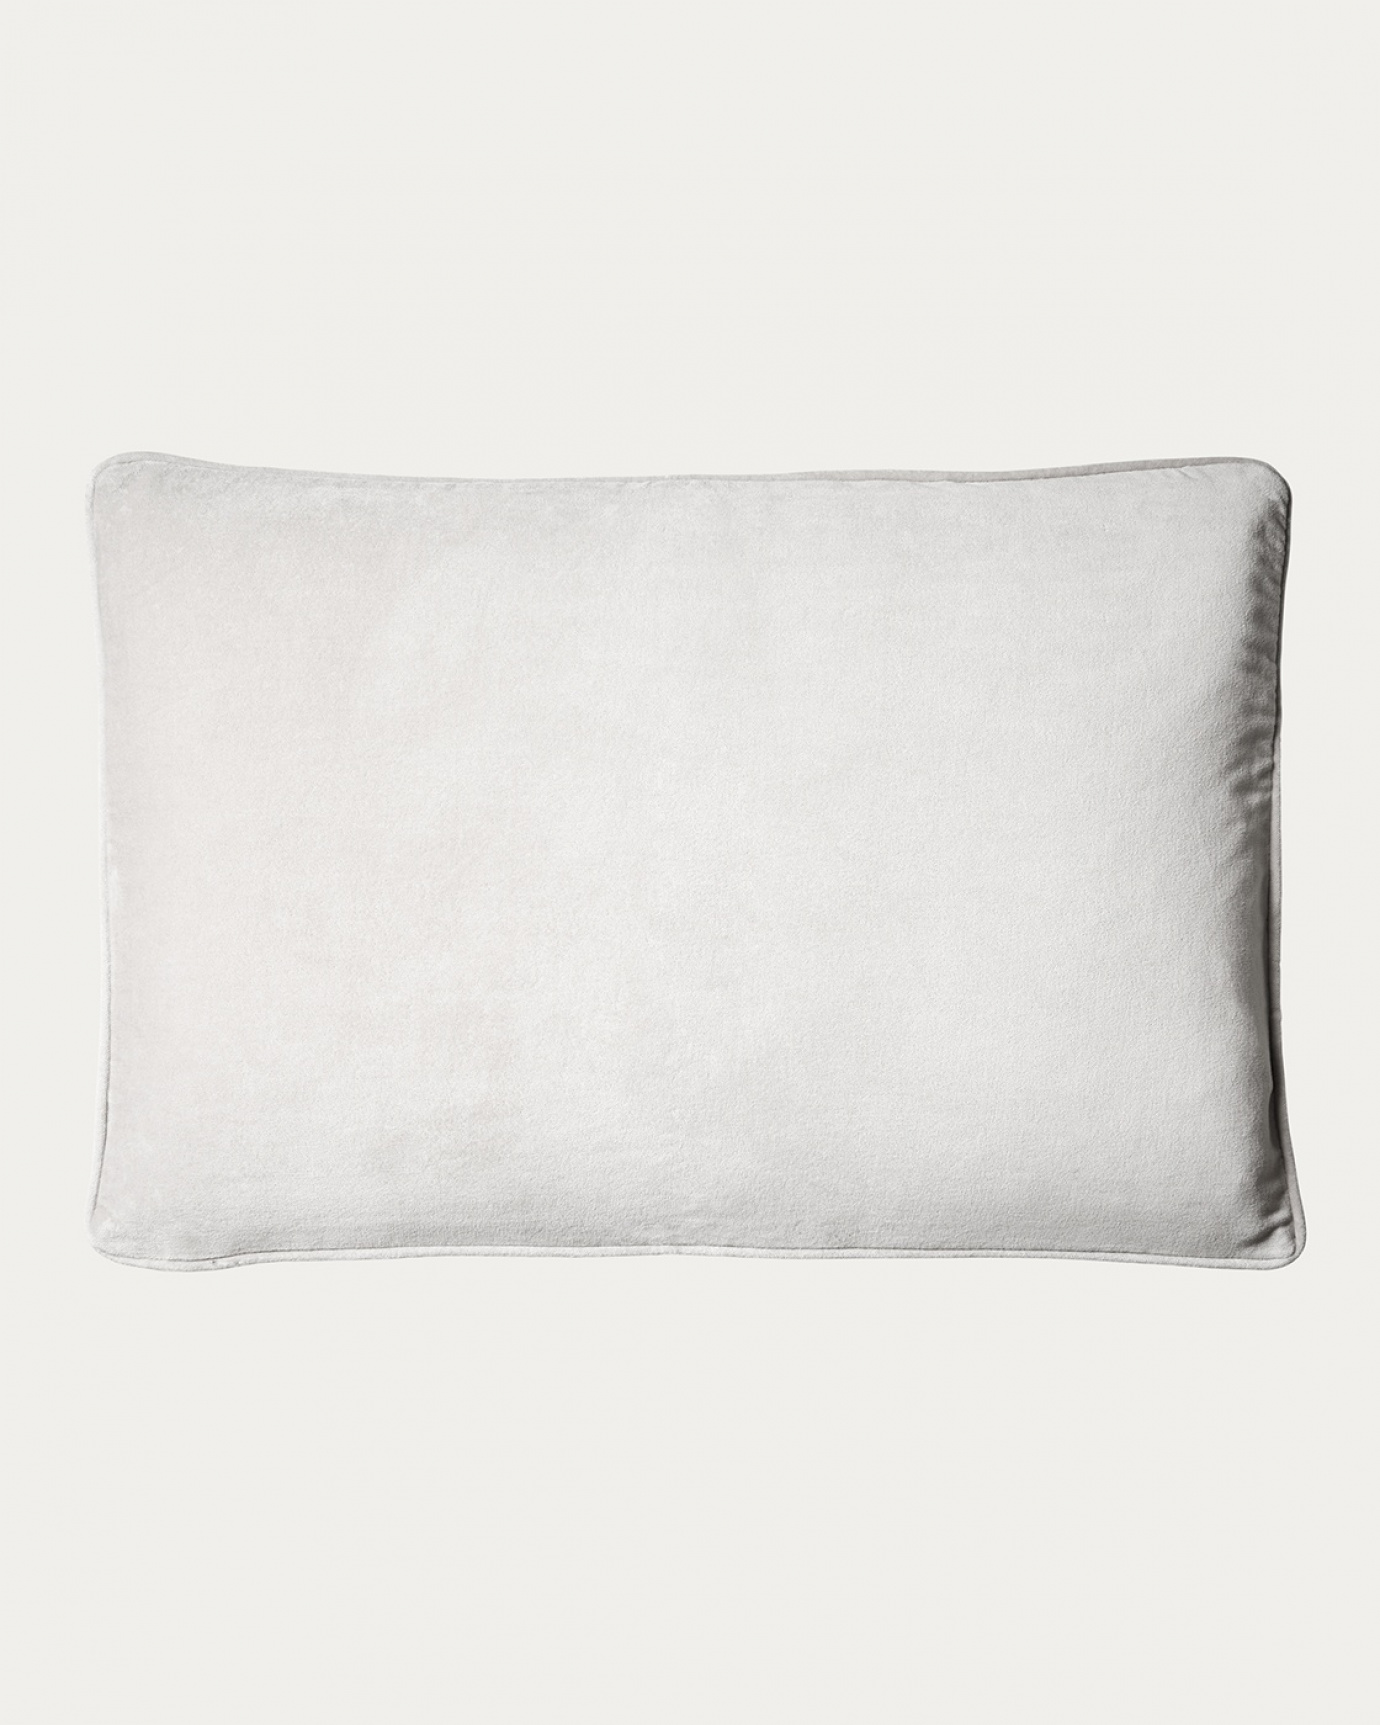 Product image silver grey PAOLO cushion cover in soft organic cotton velvet from LINUM DESIGN. Size 40x60 cm.